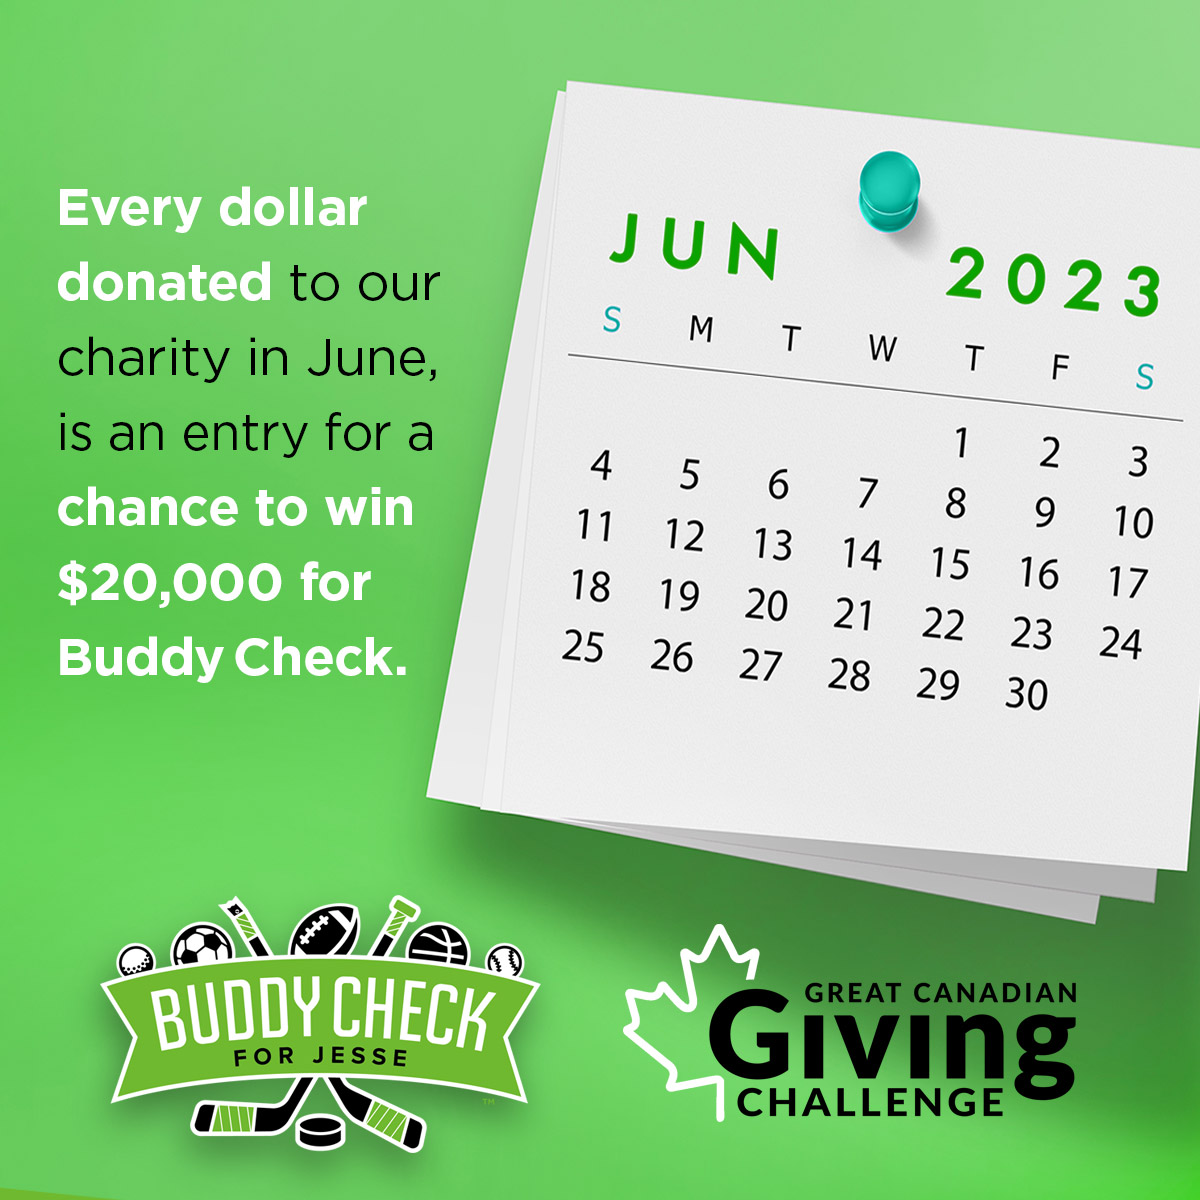 This a gentle reminder that throughout June, we will be entered to win $20K from #CanadaHelps and their Great Canadian Giving Challenge. 

To donate: buddycheckforjess.com/donate

#BuddyCheckforJesse
#GivingChallengeCA
#YouthMentalHealth